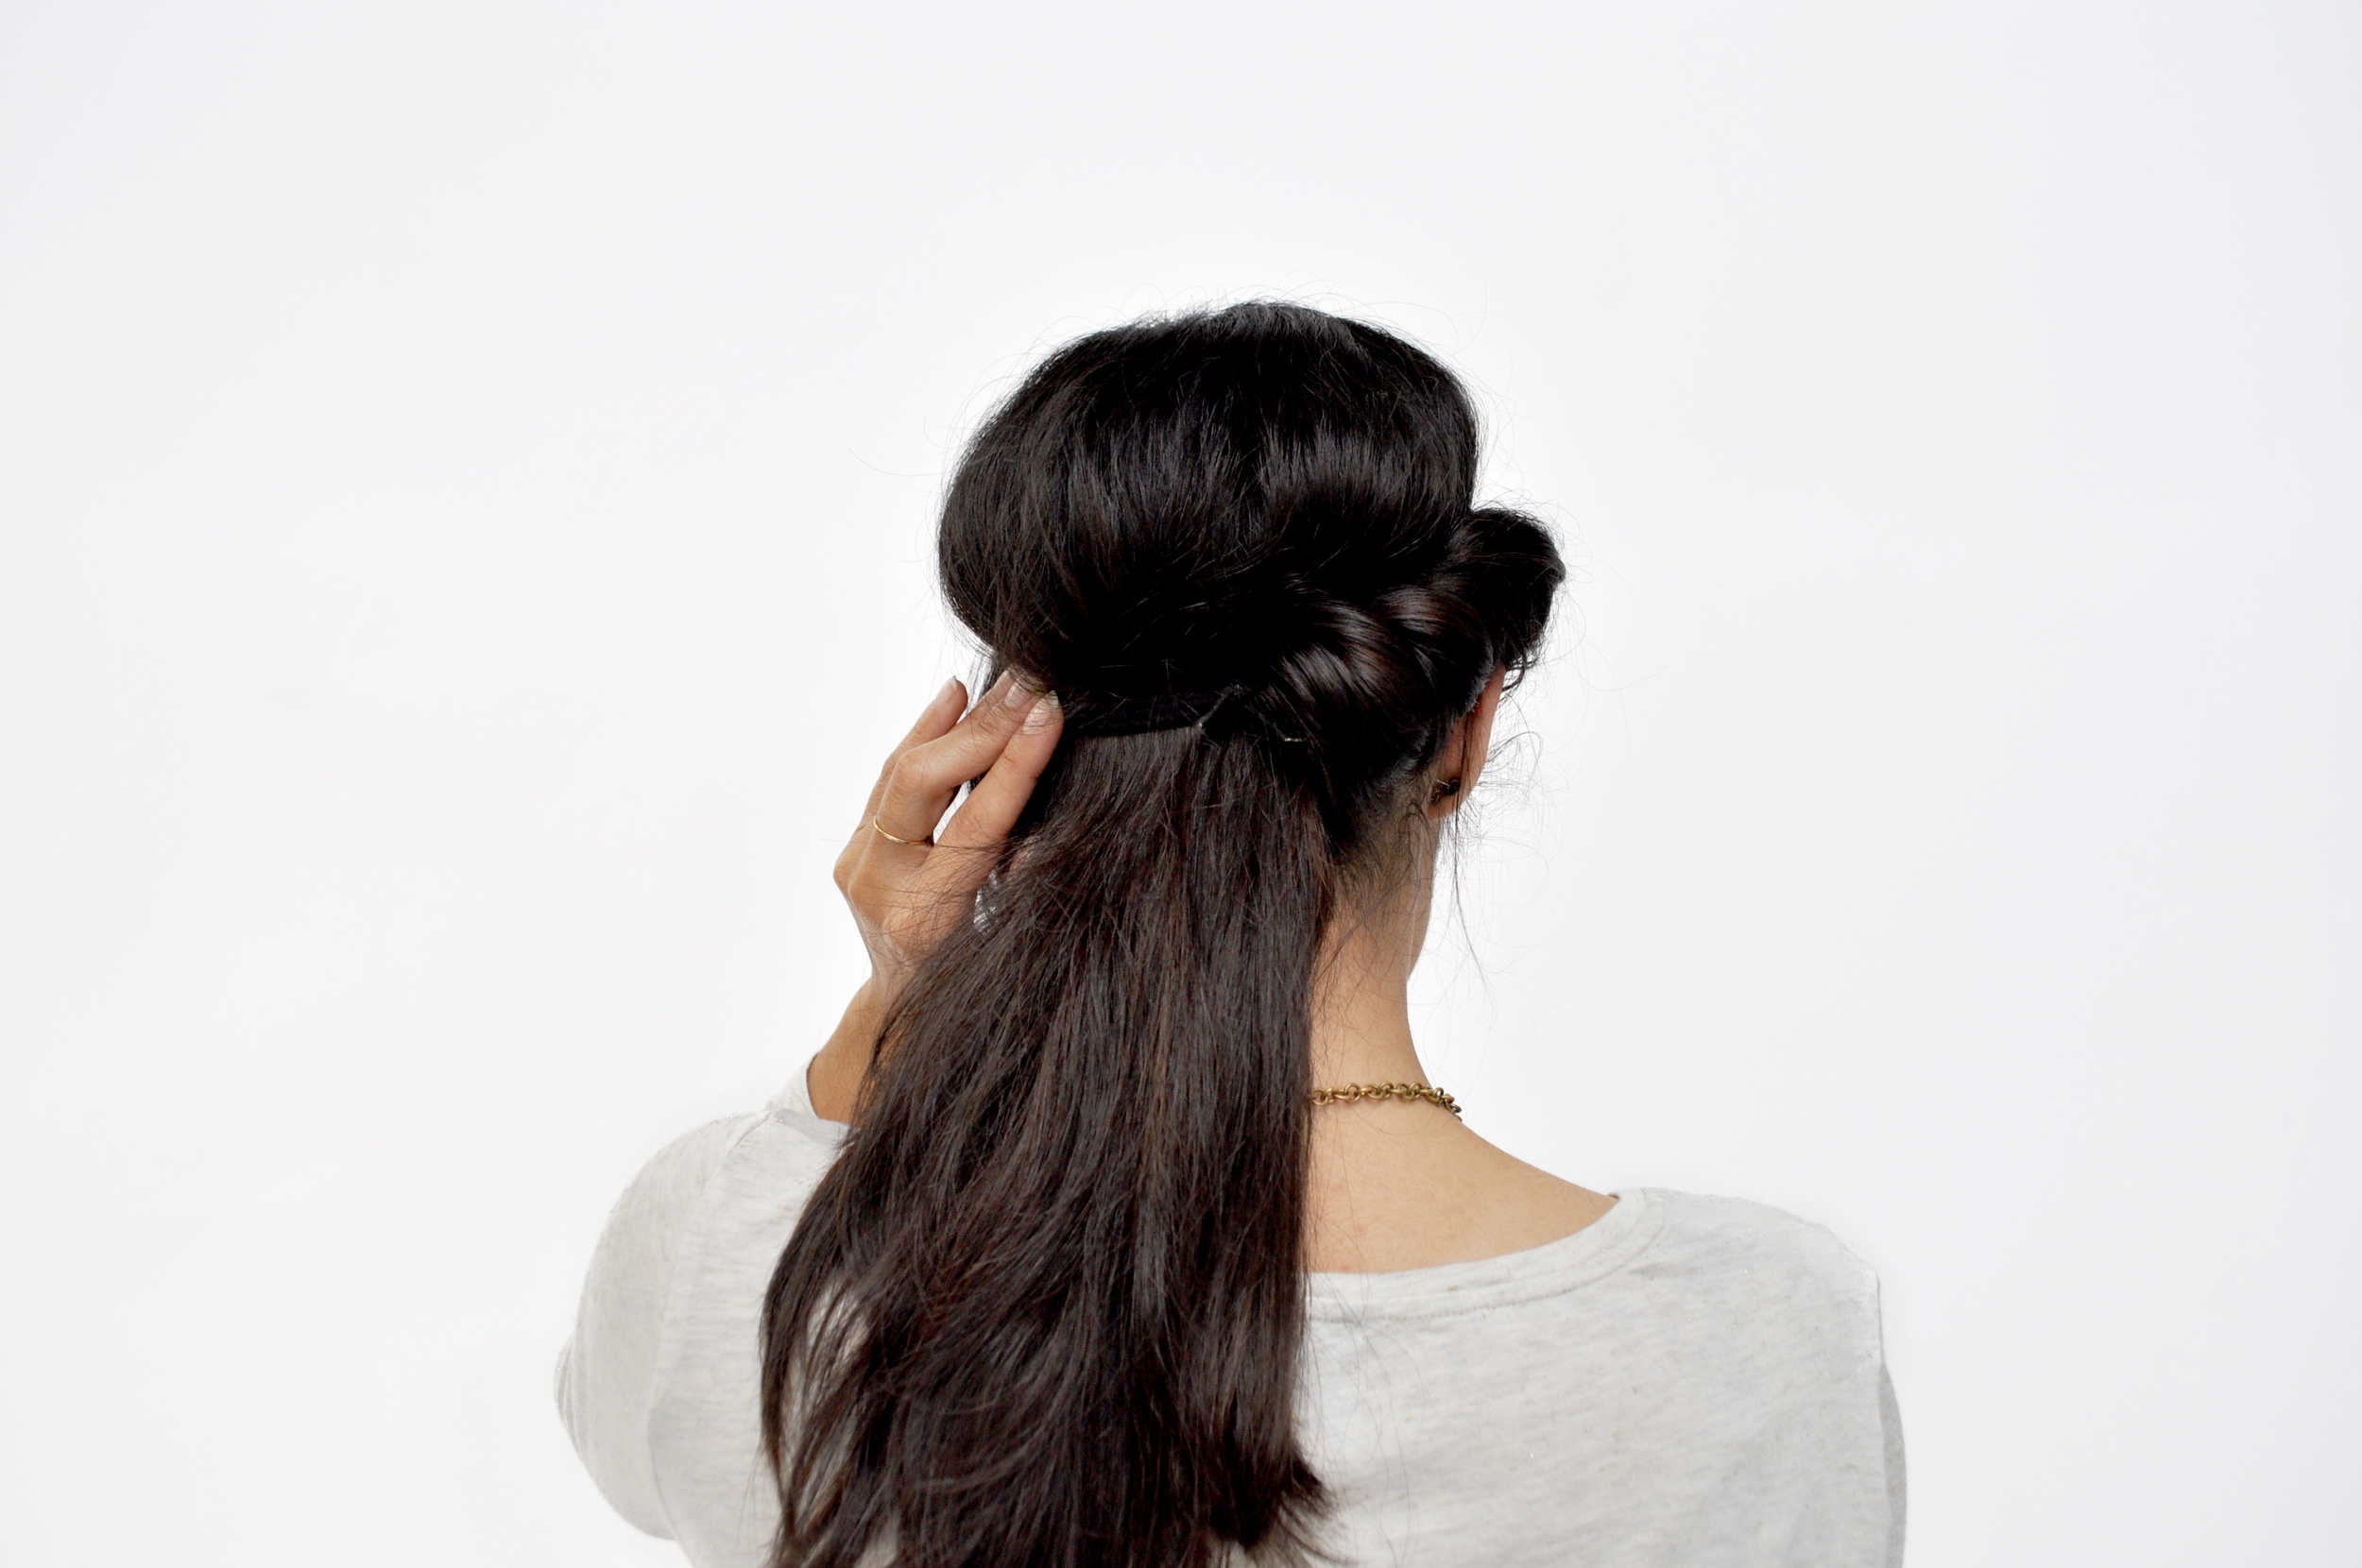  On one side of your hair, start tucking in your hair through the headband, and continue rolling until you get to the end. Repeat on the other side. 